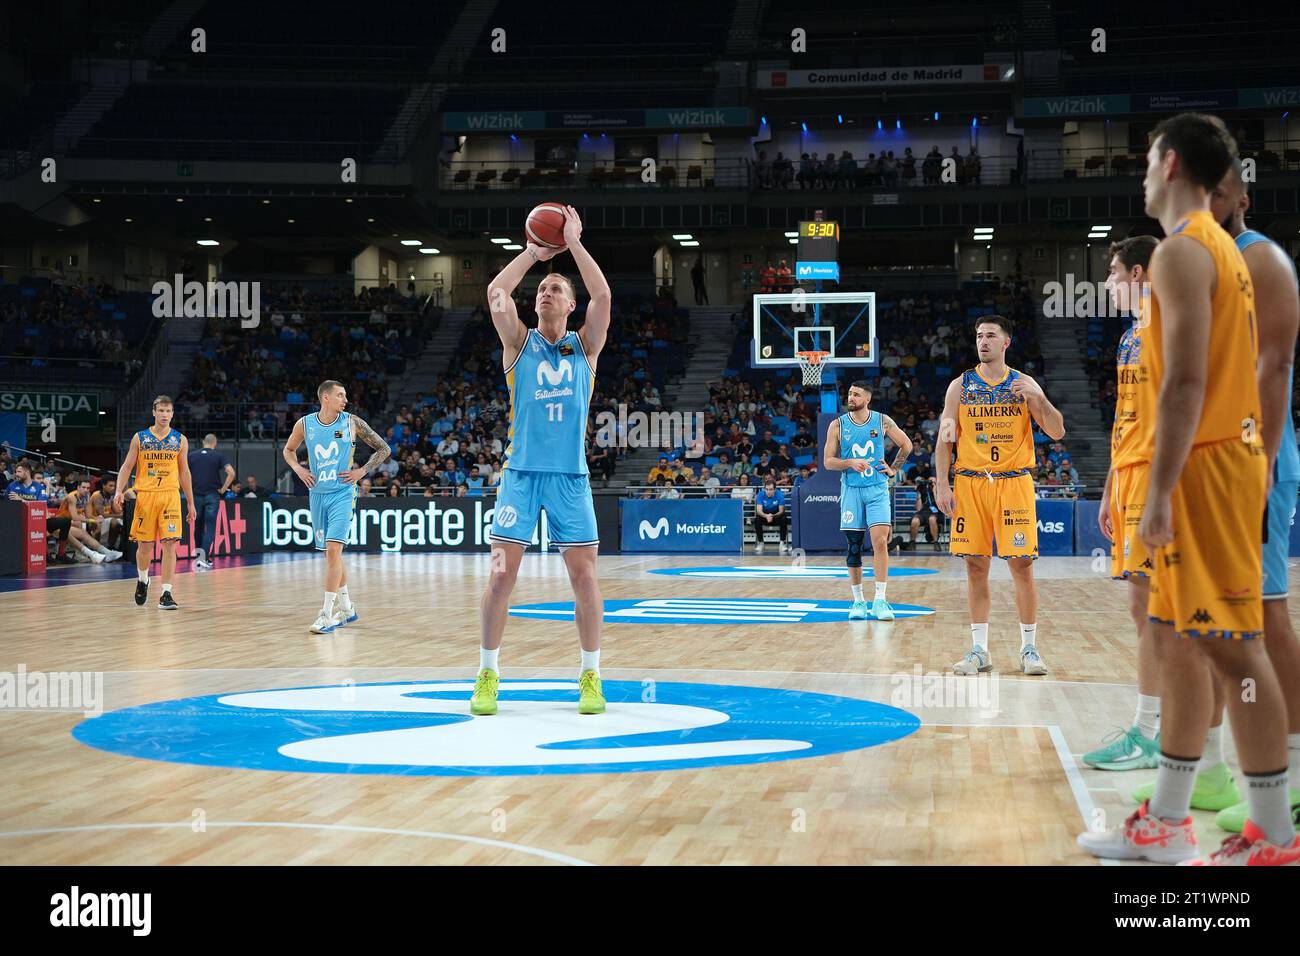 Hector Alderete  of Movistar Estudiantes seen in action during the J2 LEB Oro Match between Movistar Estudiantes and Alimerka Oviedo at WiZink Center. Stock Photo